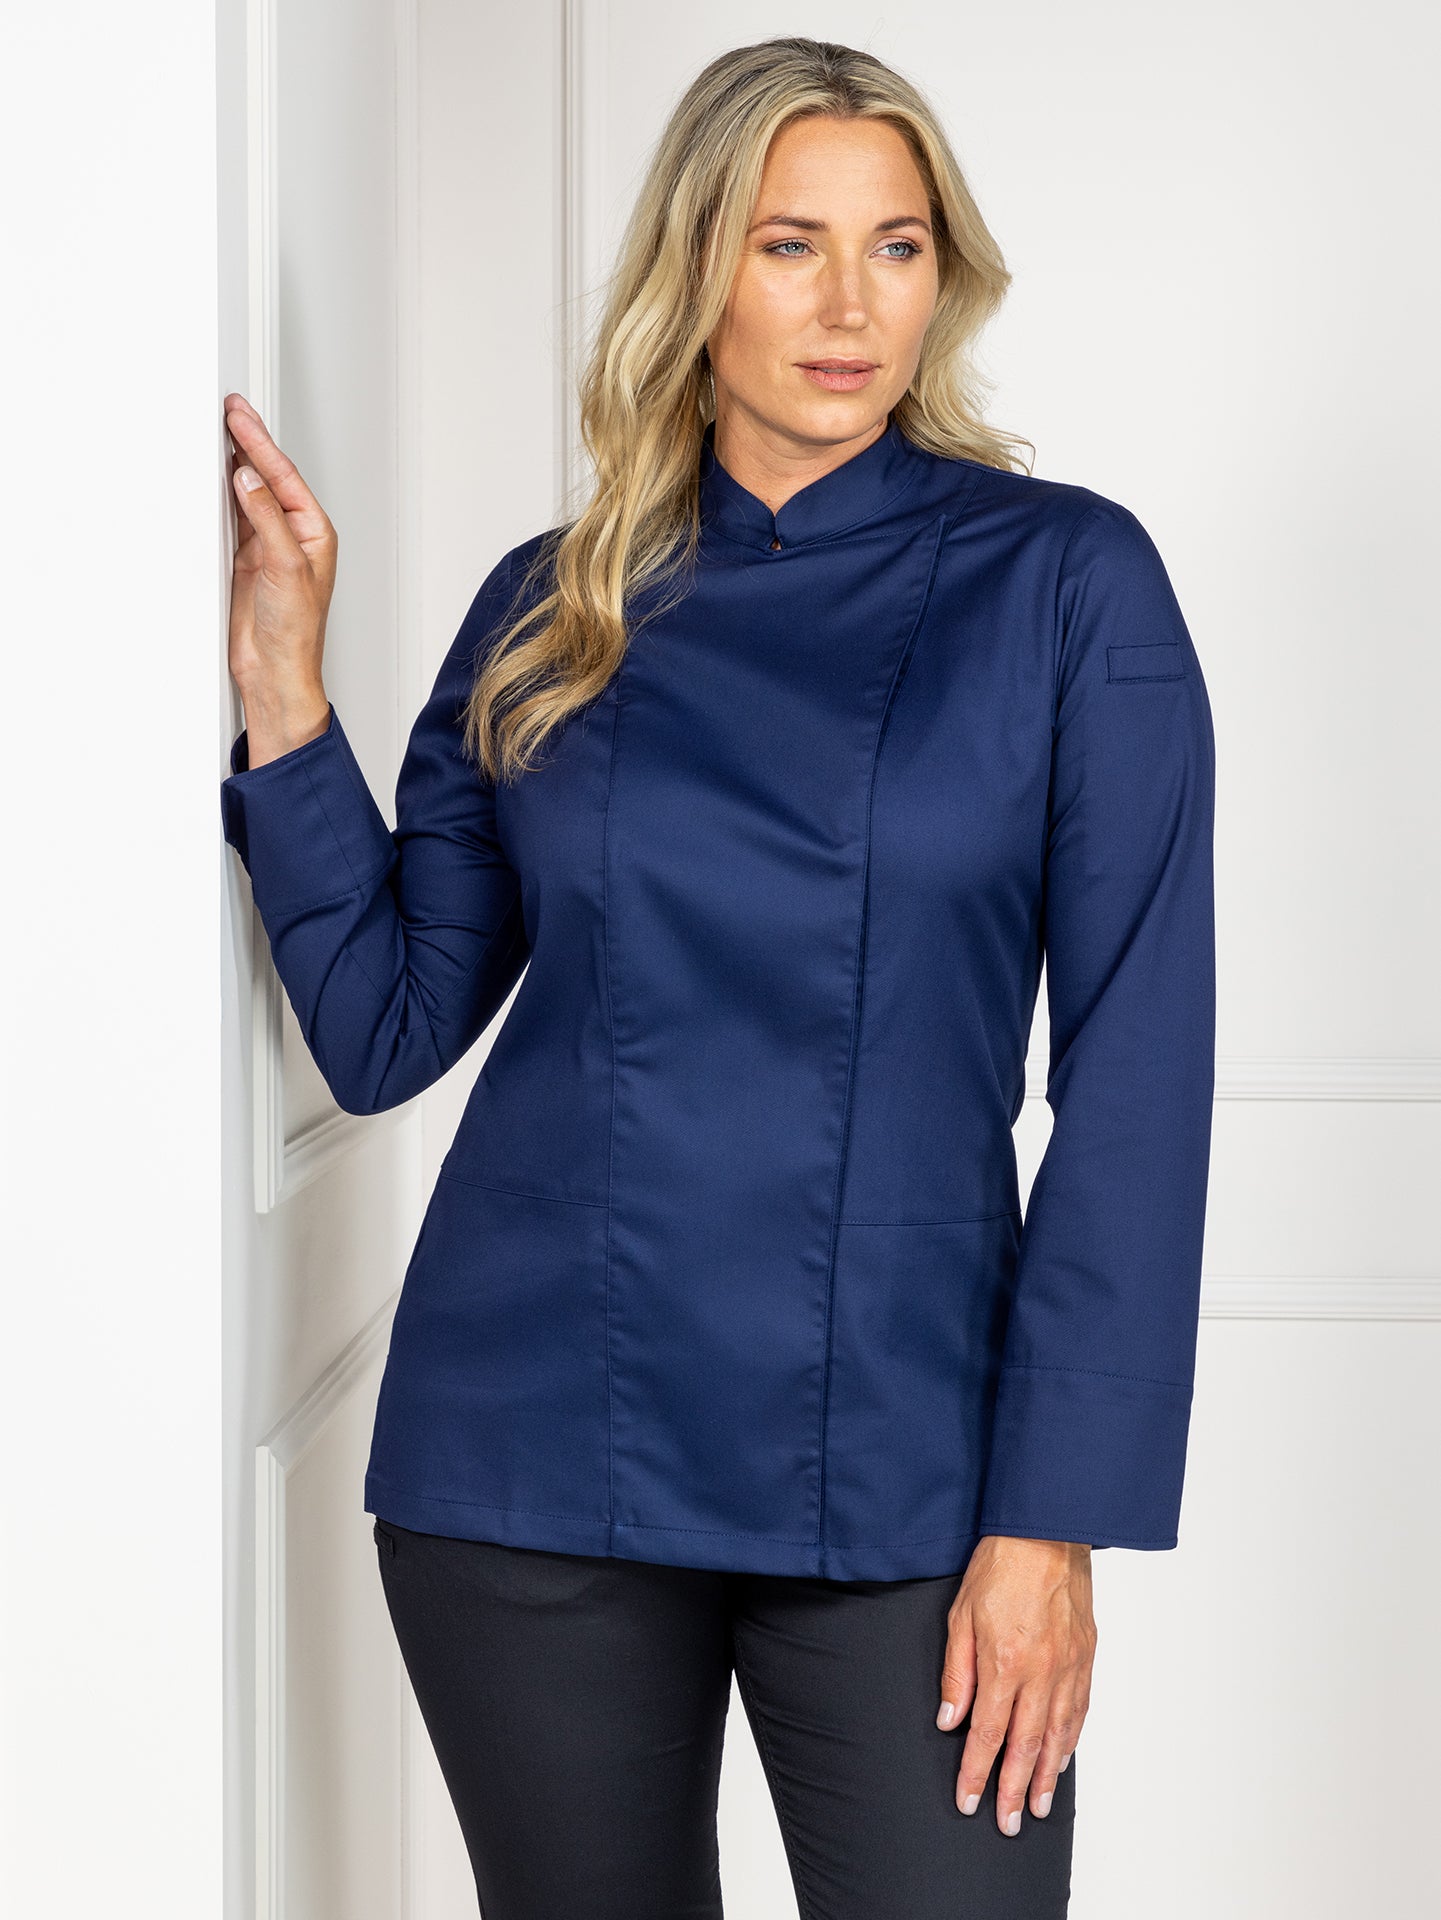 Chef Jacket Lynn Navy by Le Nouveau Chef -  ChefsCotton